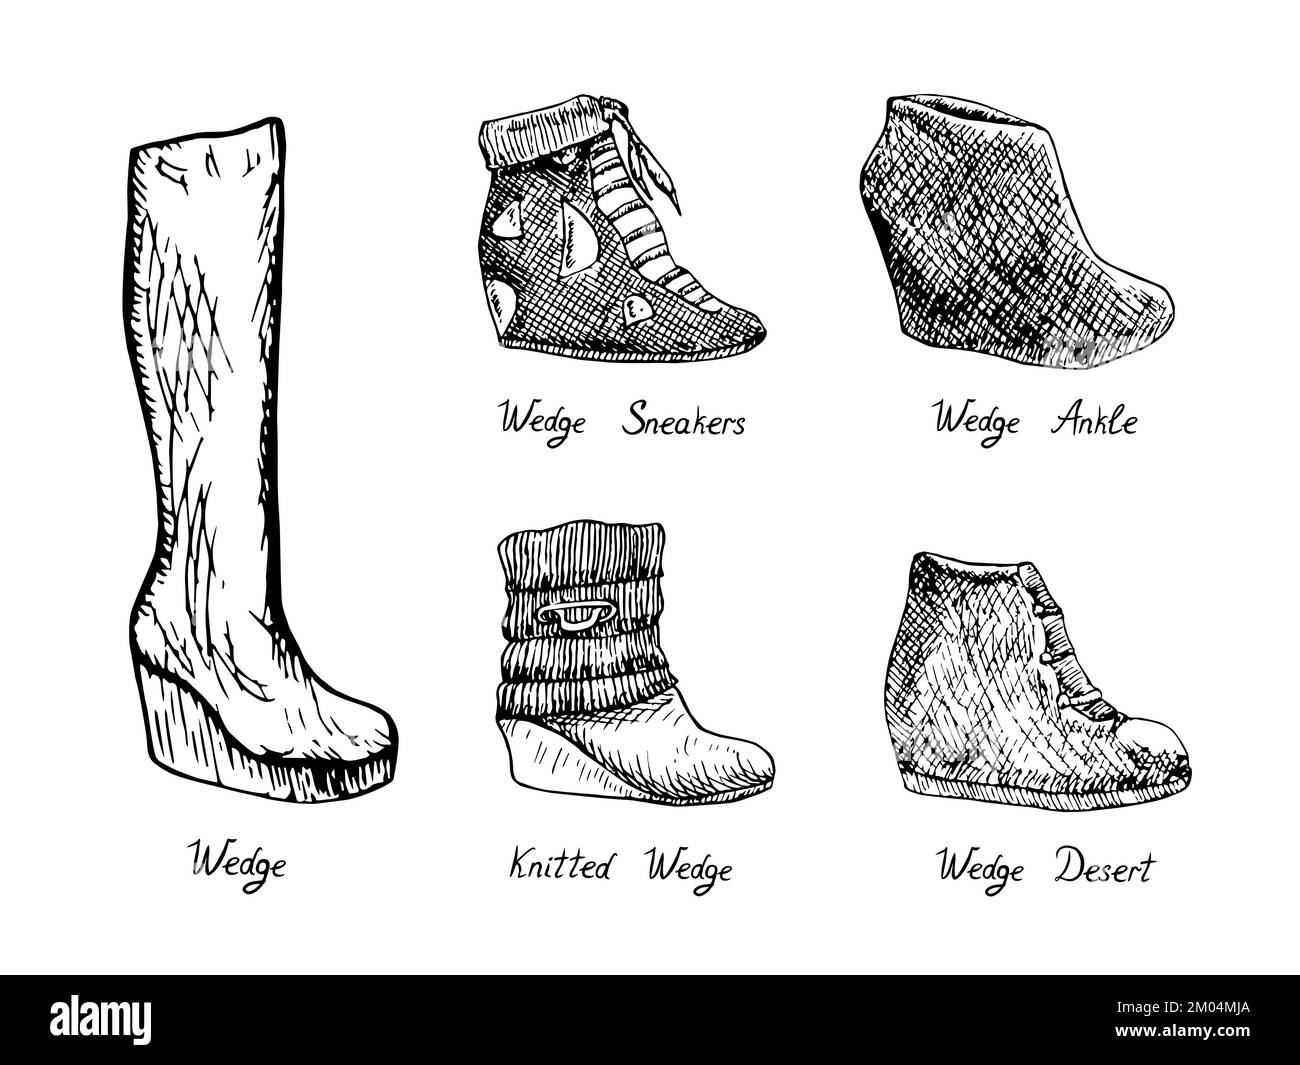 Wedge,Wedge sneakers, Wedge ankle, Knitted wedge, Wedge desert, isolated hand drawn outline doodle, sketch, black and white illustration with Stock Photo